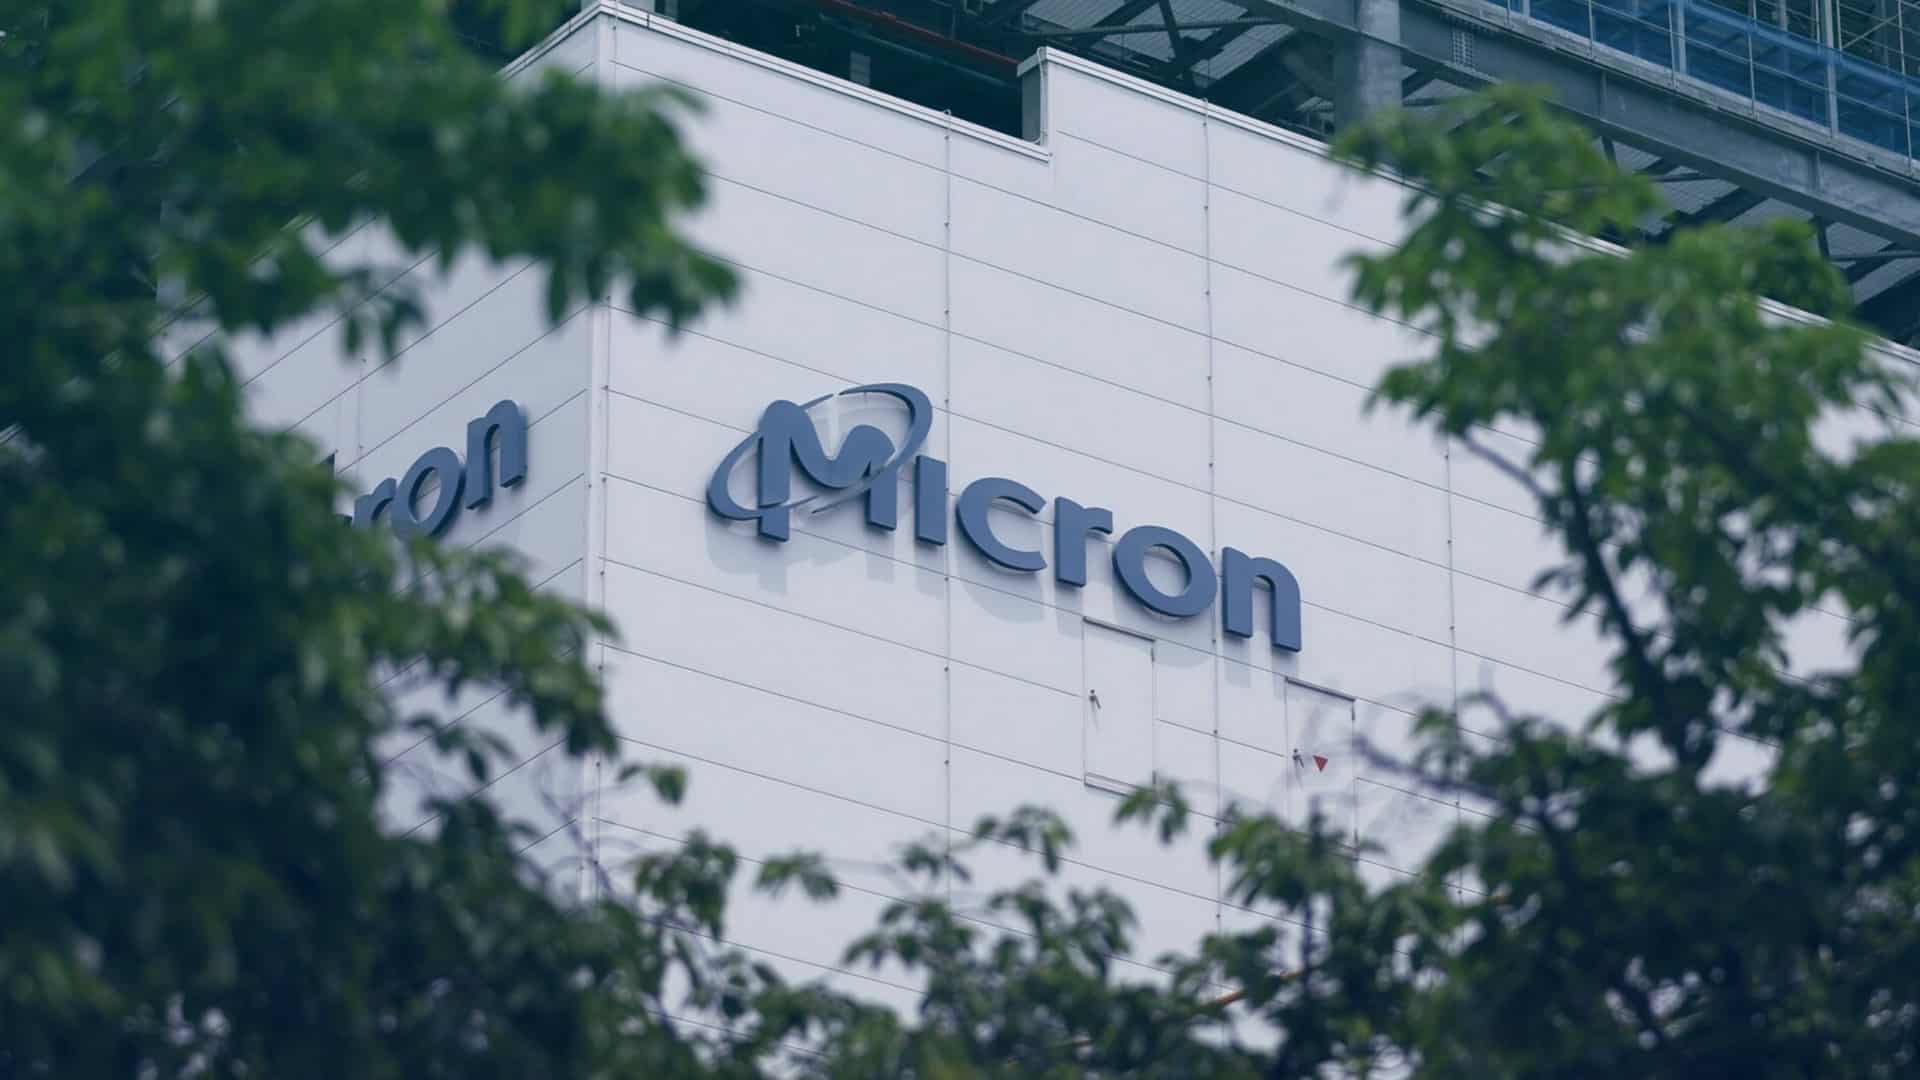 Govt approves USD 2.7-billion Micron's chip plant; unit expected to create 5,000 jobs